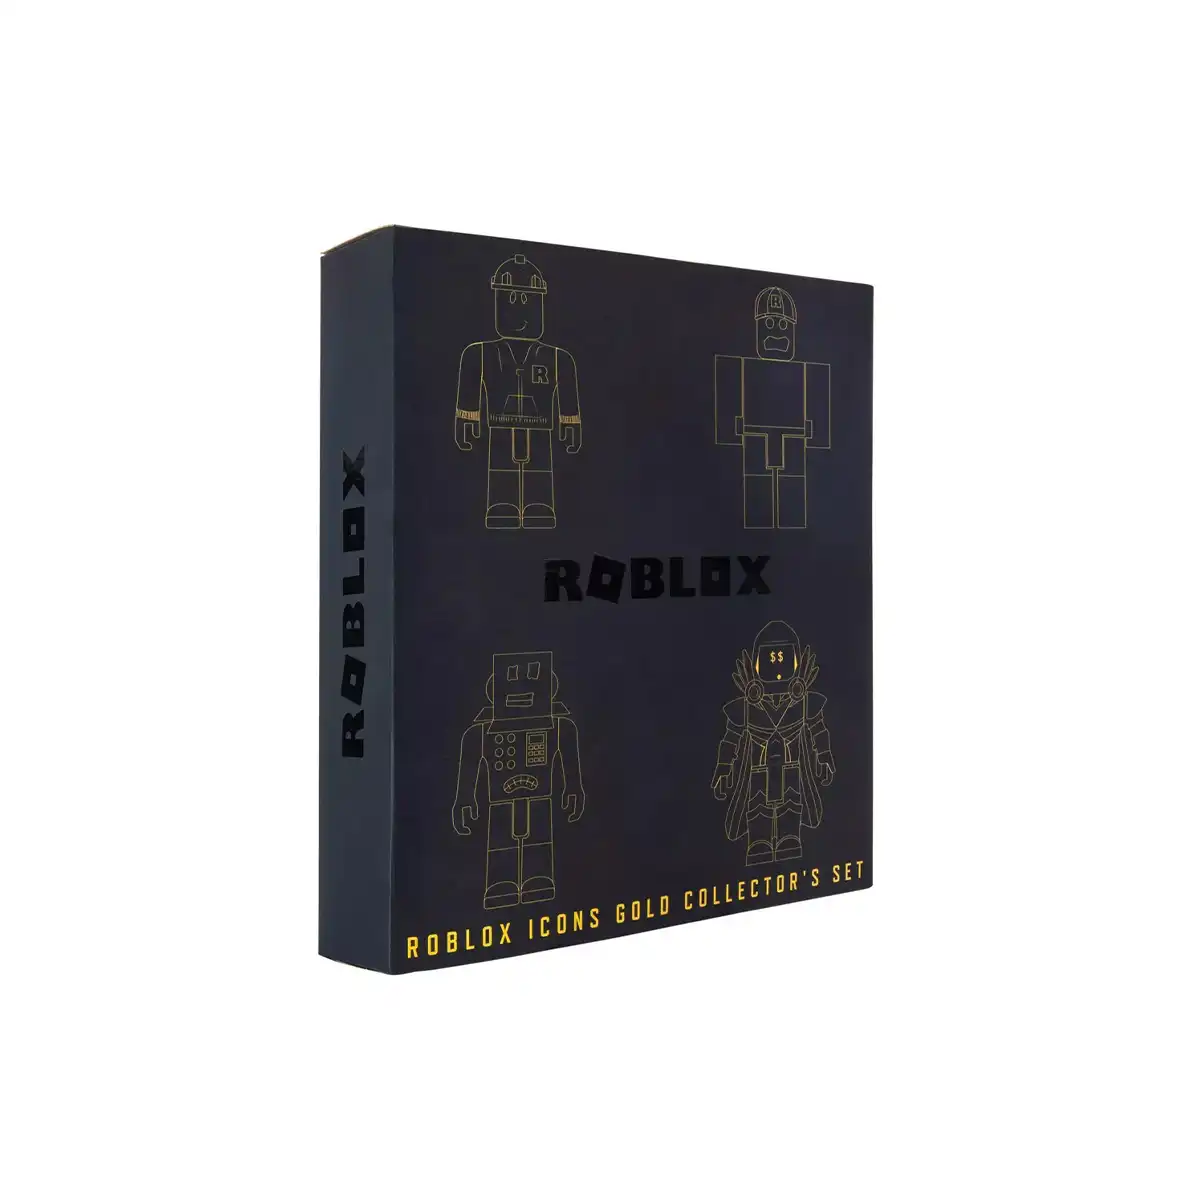 ROBLOX ICONS GOLD COLLECTORS Builderman+Mr. Robot Lot Of 3 191726405405